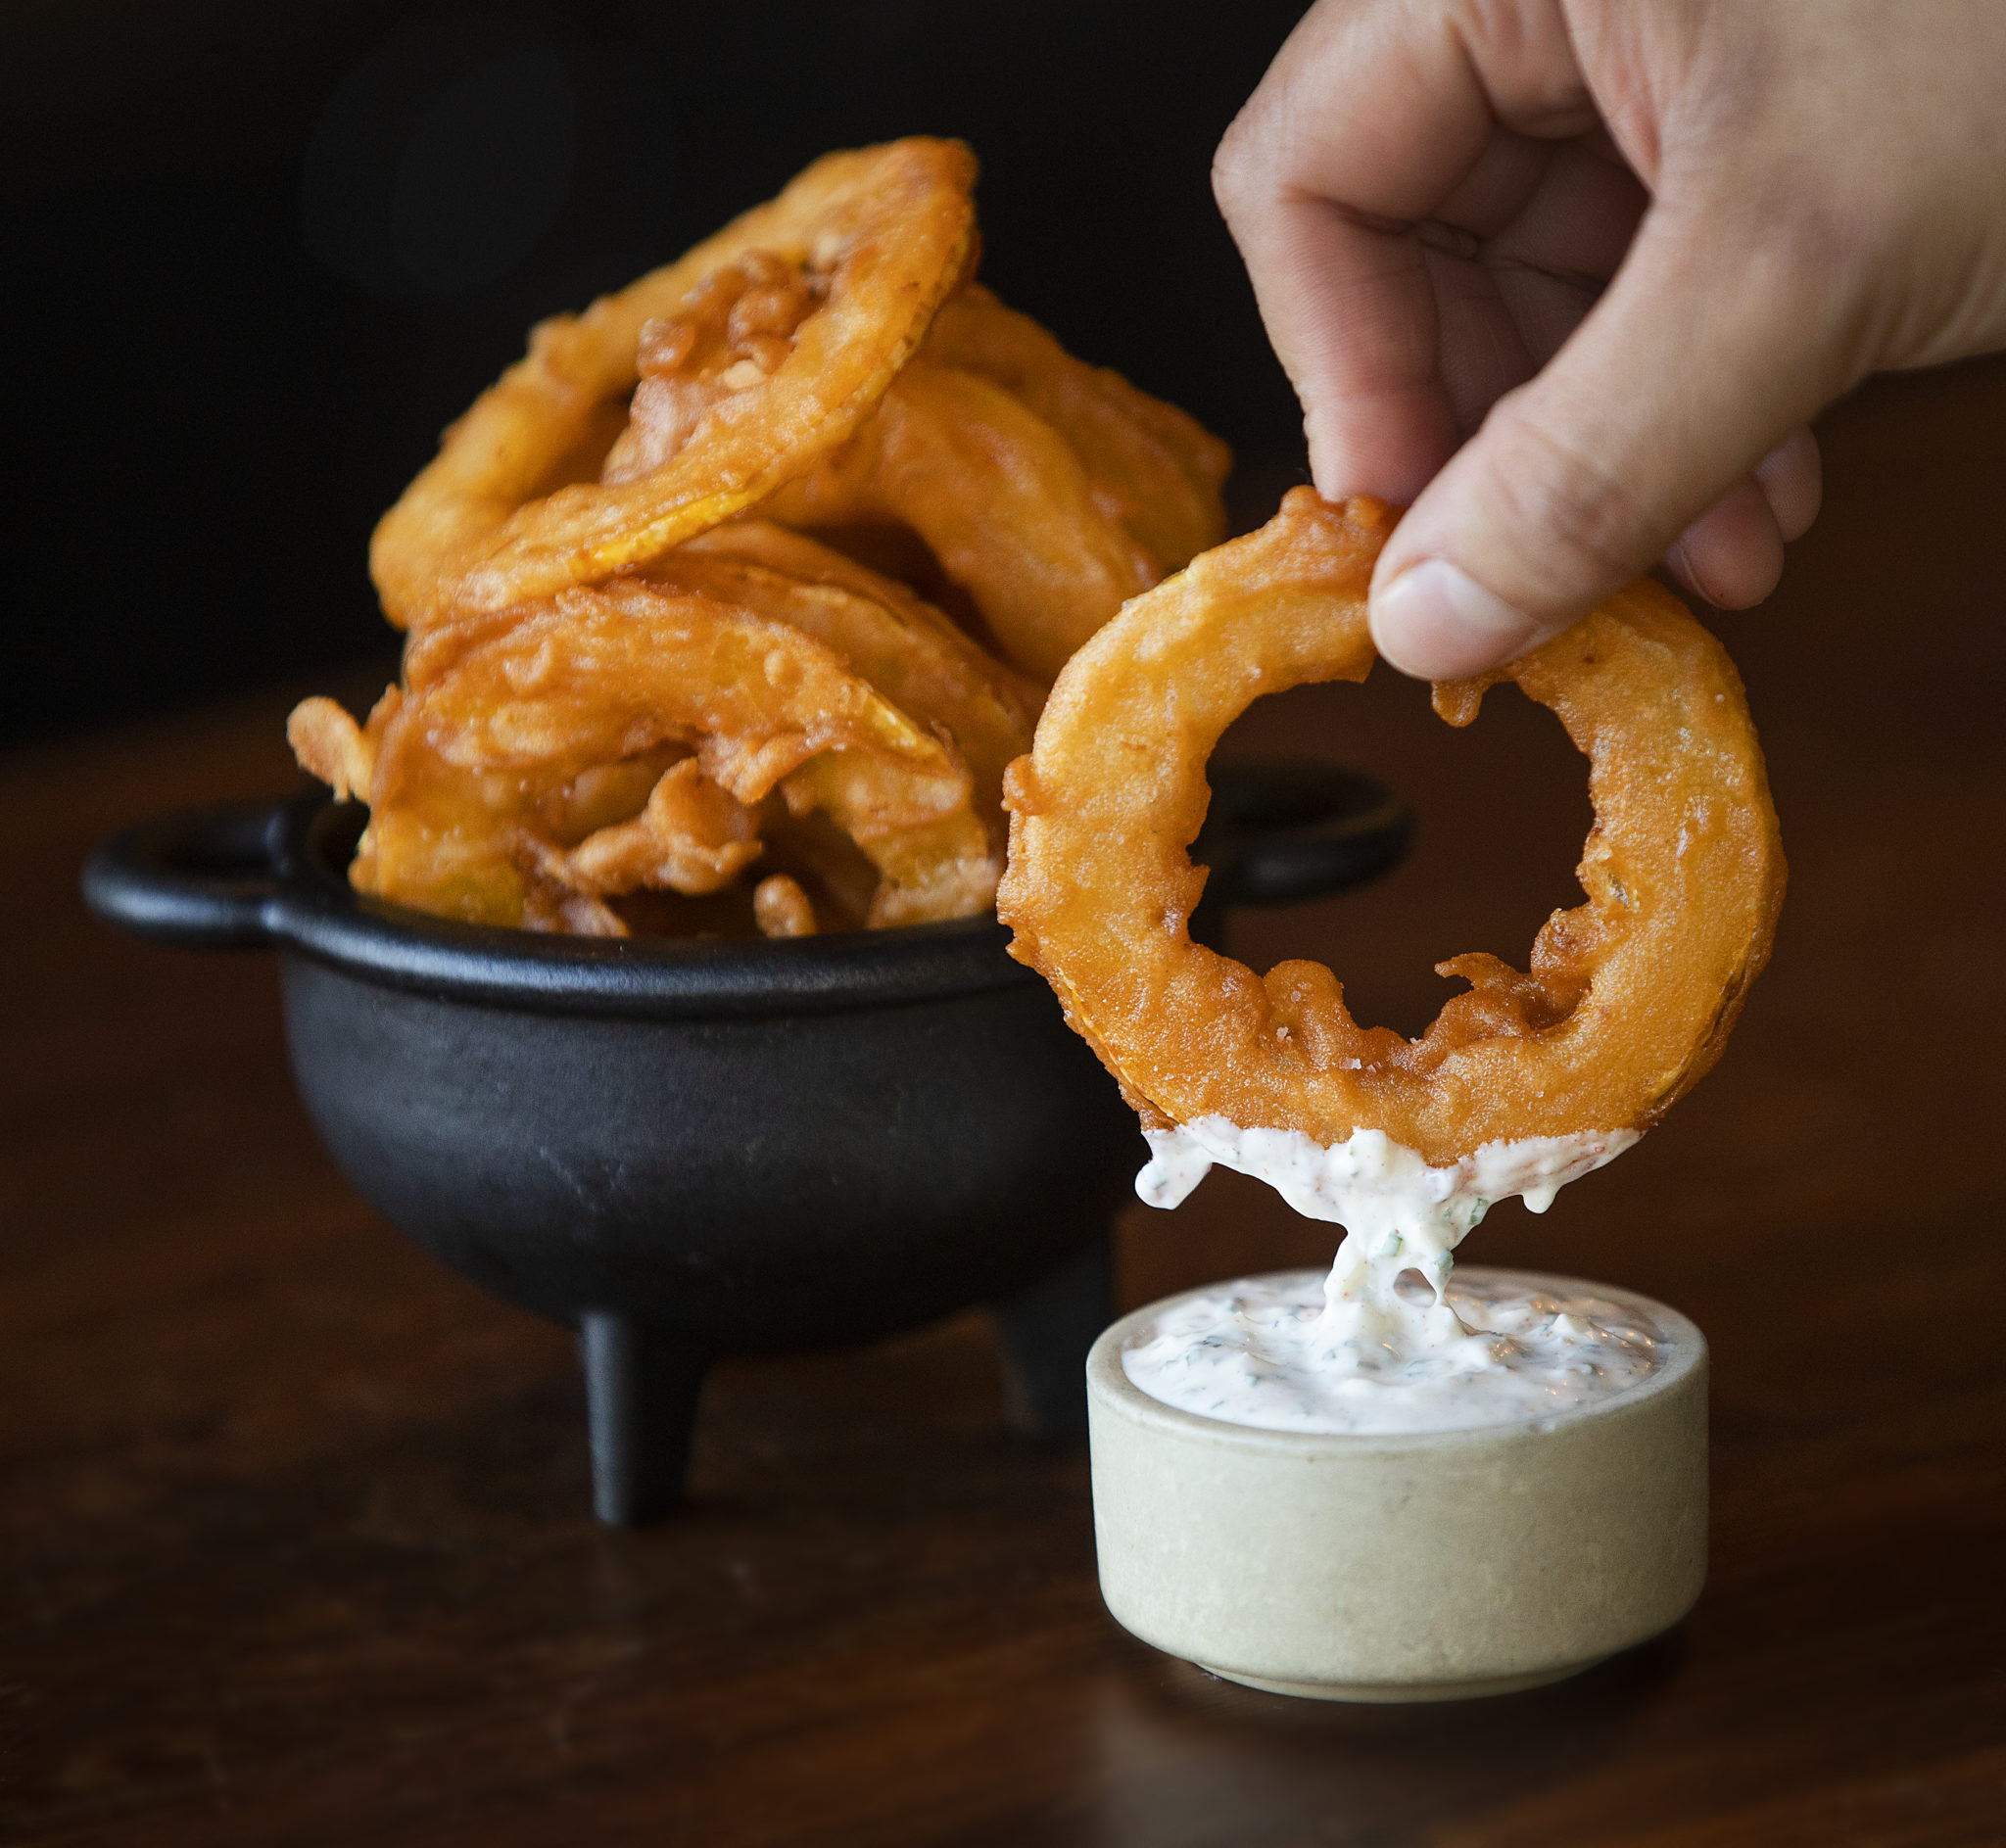 Delicata Rings in beer batter with house ranch dip from Table Culture Provisions in Petaluma. (John Burgess/The Press Democrat)